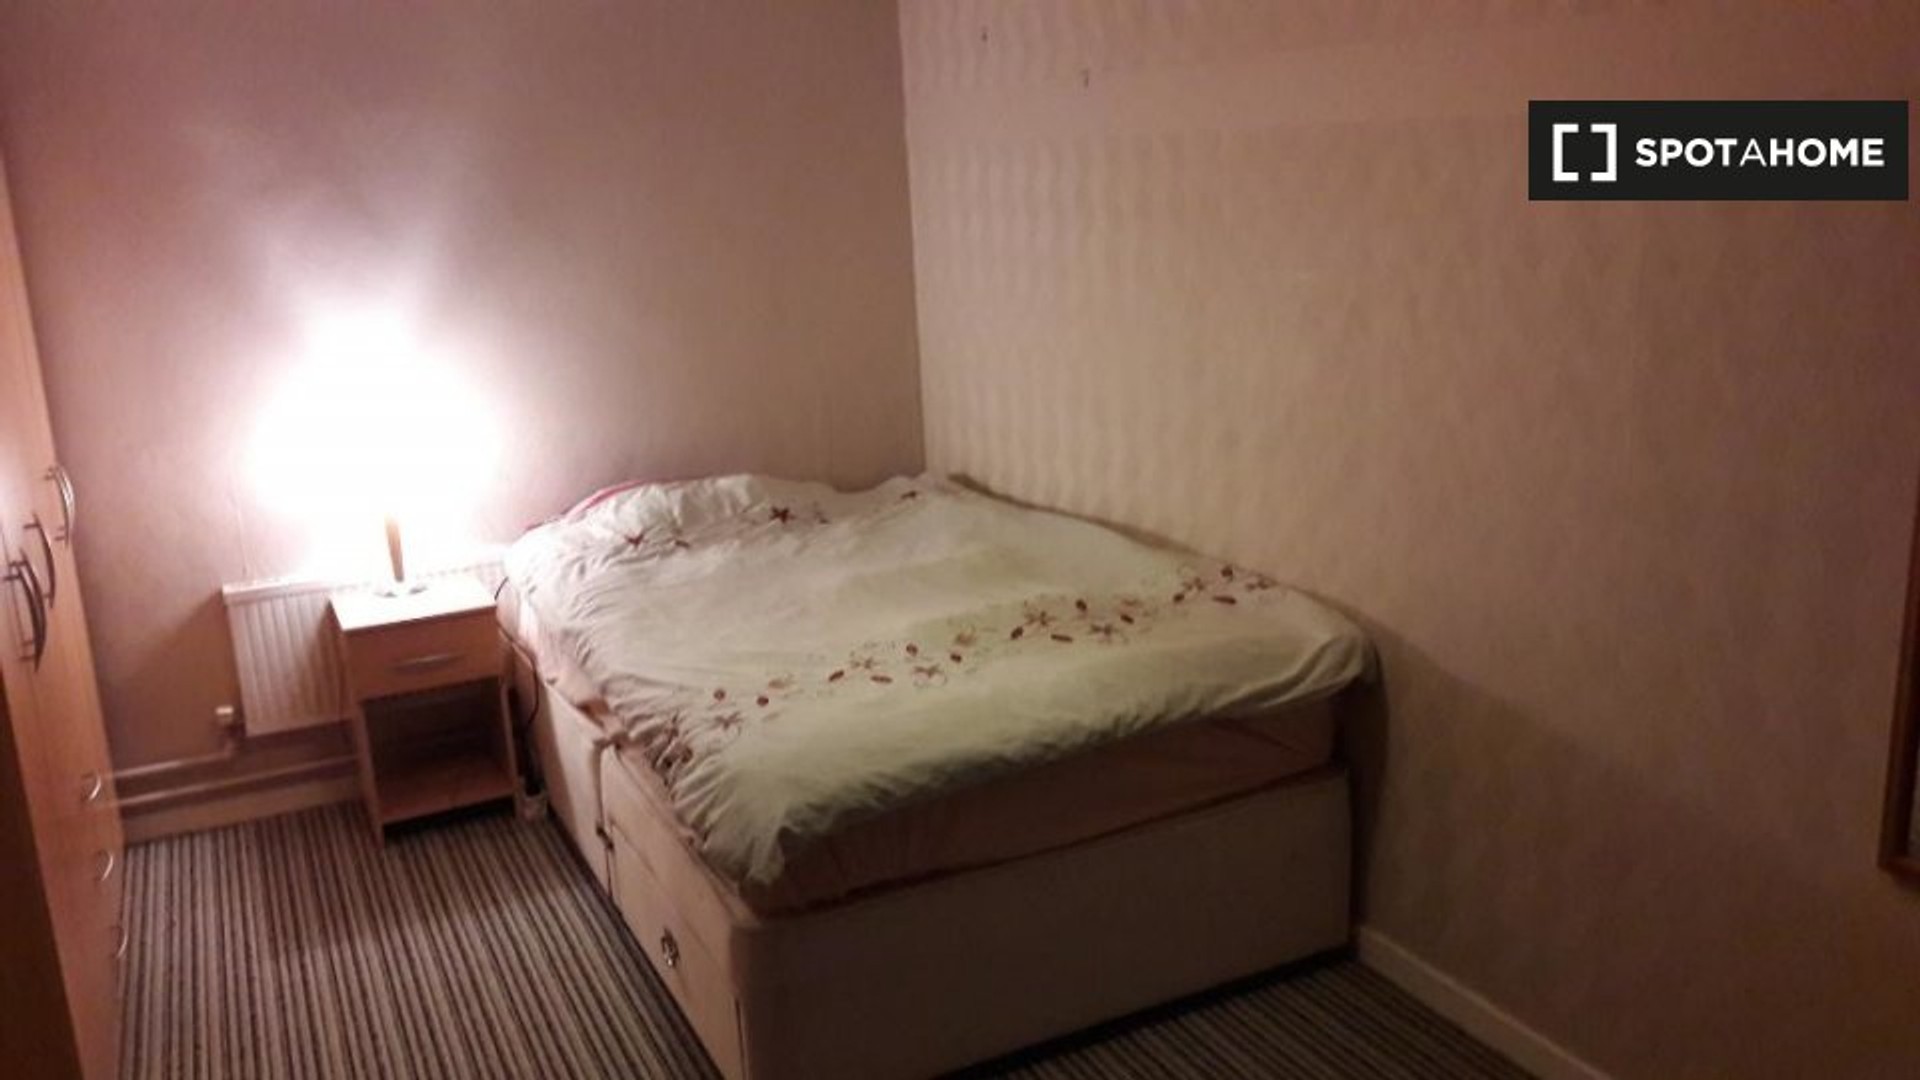 Room for rent in a shared flat in Nottingham